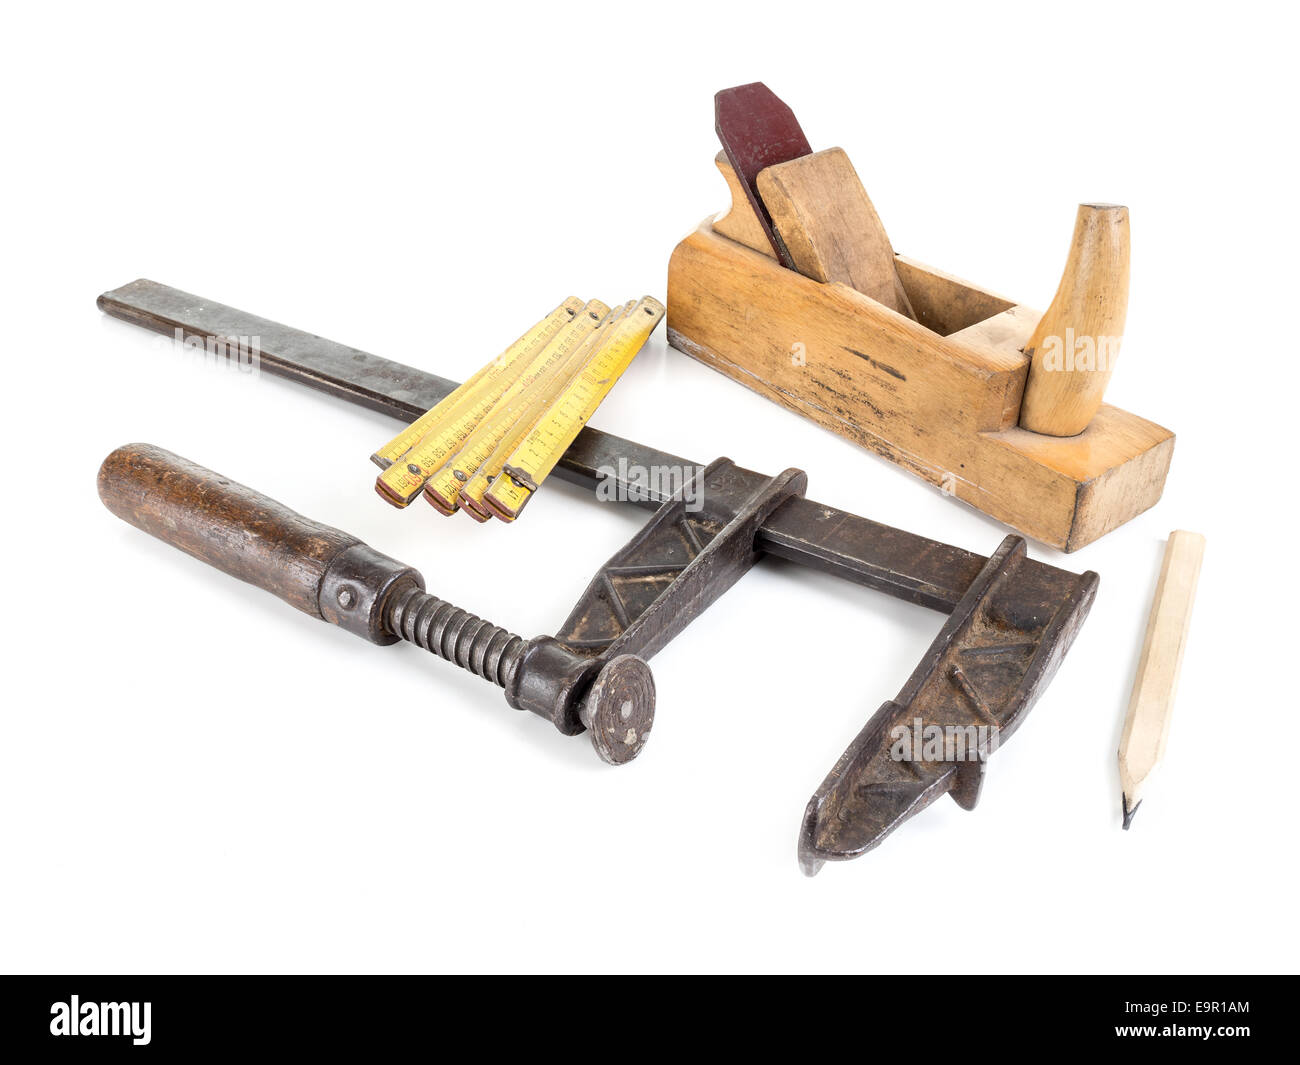 Basic set of carpenter's tools consisting of metal clamp, wooden folding ruler, plane and pencil all shot on white Stock Photo